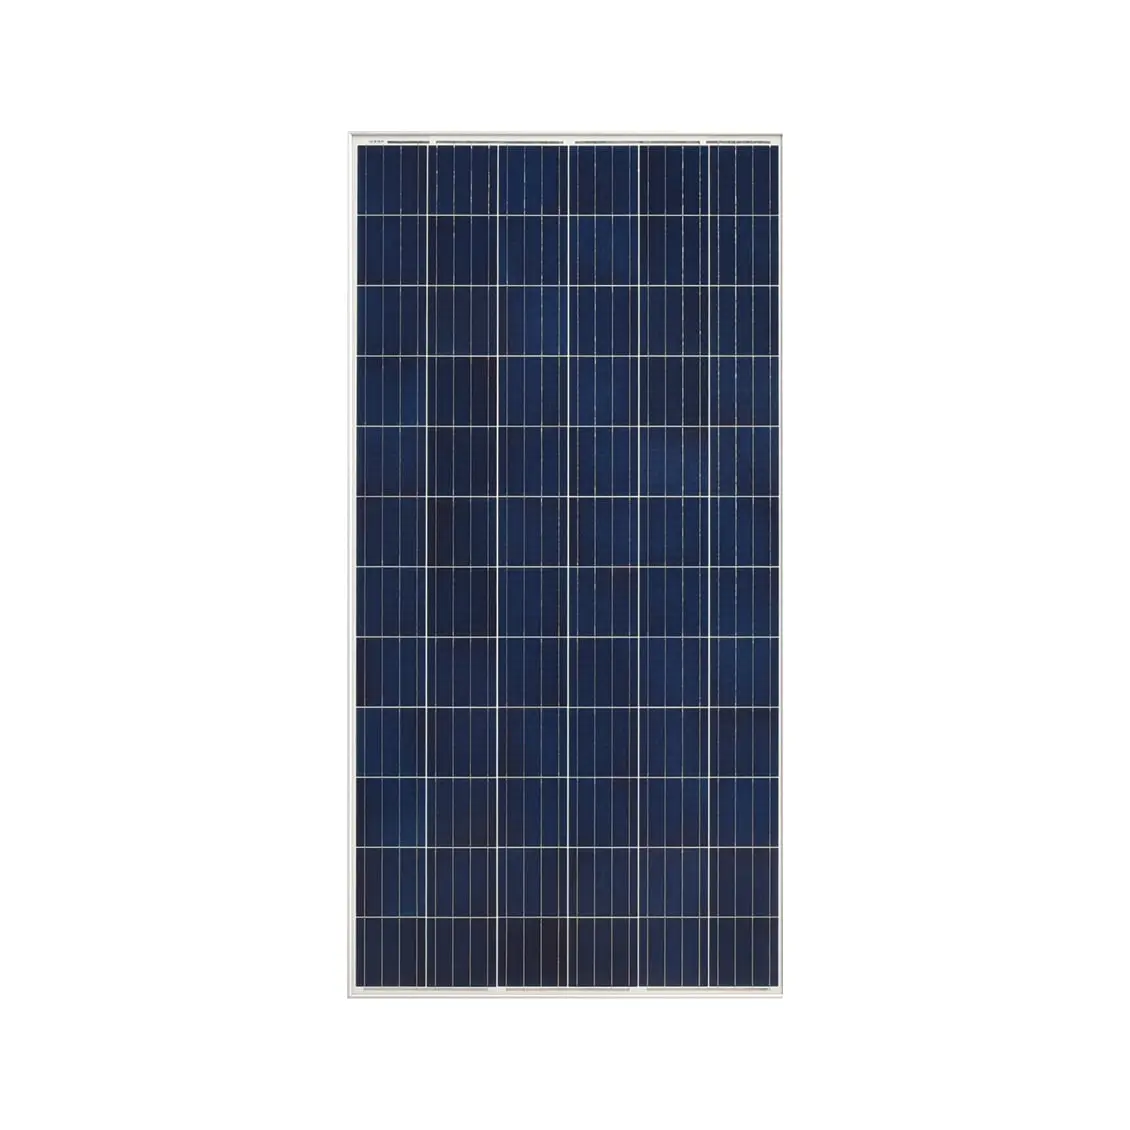 325w solar panel voltage - What is the voltage of a 365w solar panel